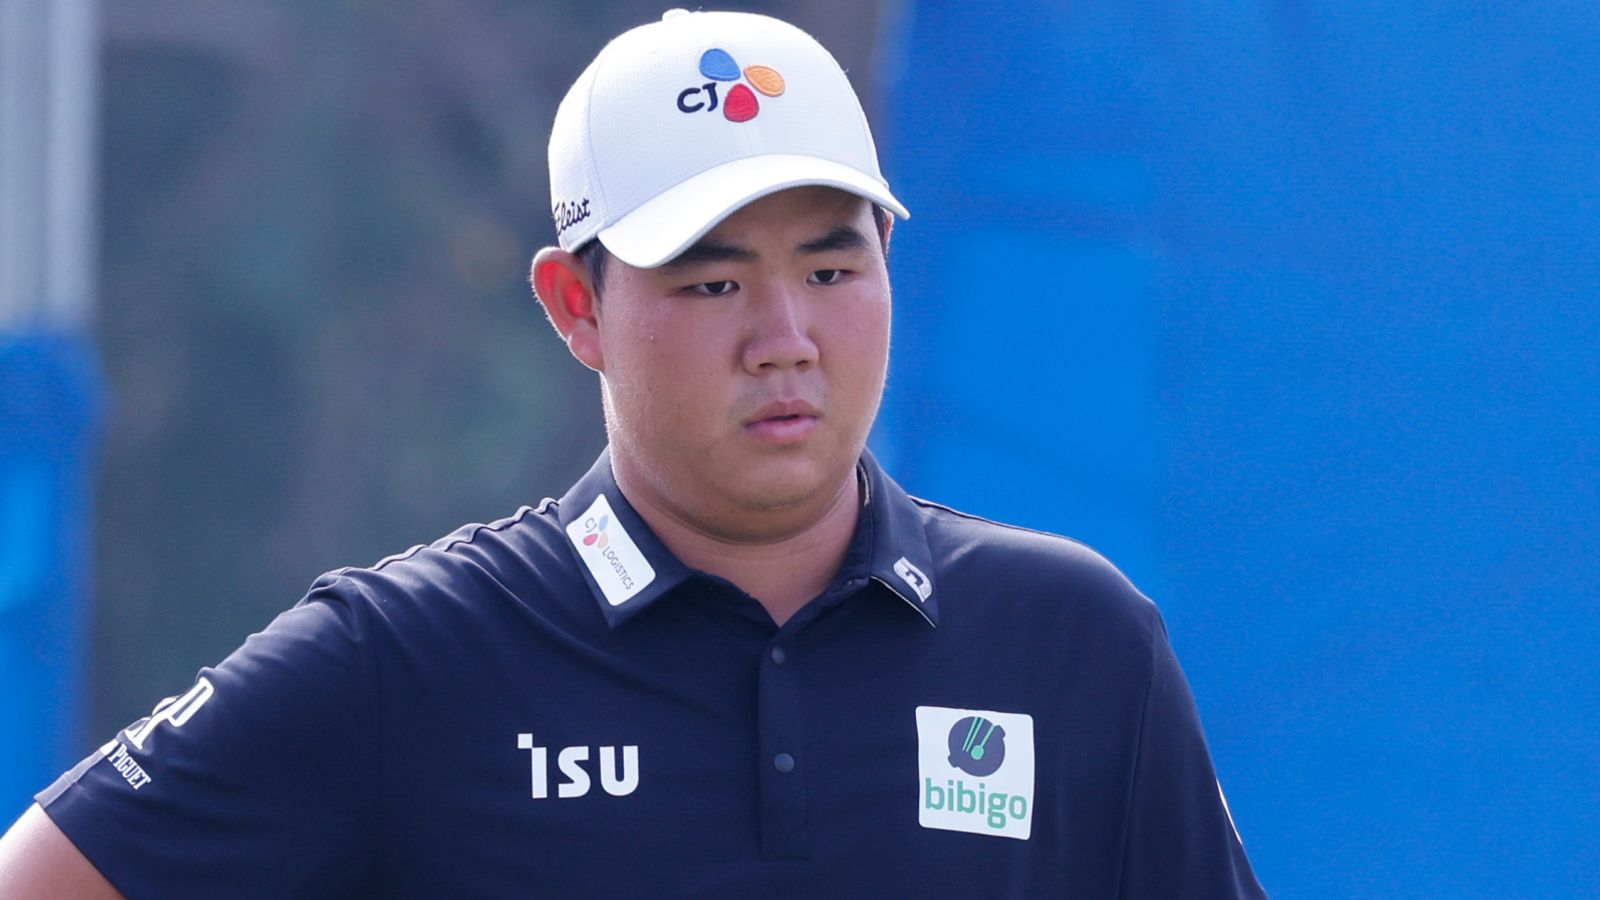 PGA Tour: Joohyung Kim shares lead at Wyndham Championship; England’s Tyrrell Hatton in the mix